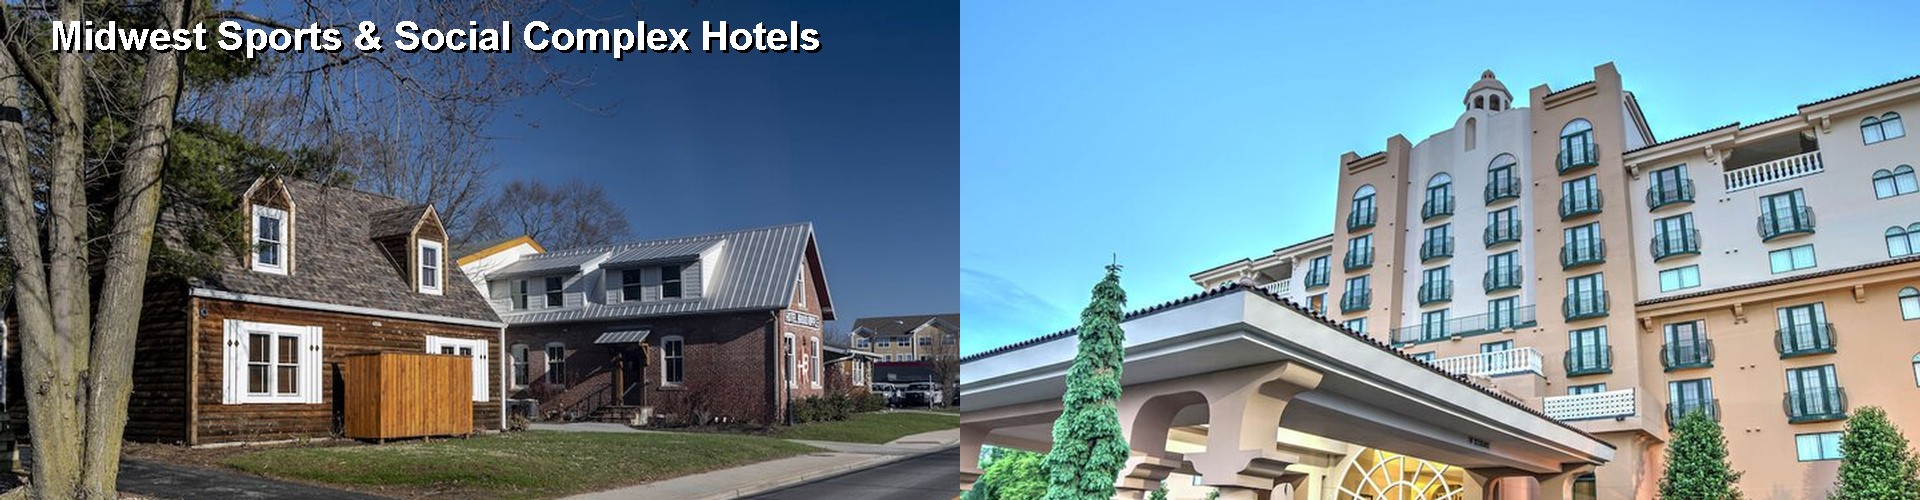 4 Best Hotels near Midwest Sports & Social Complex